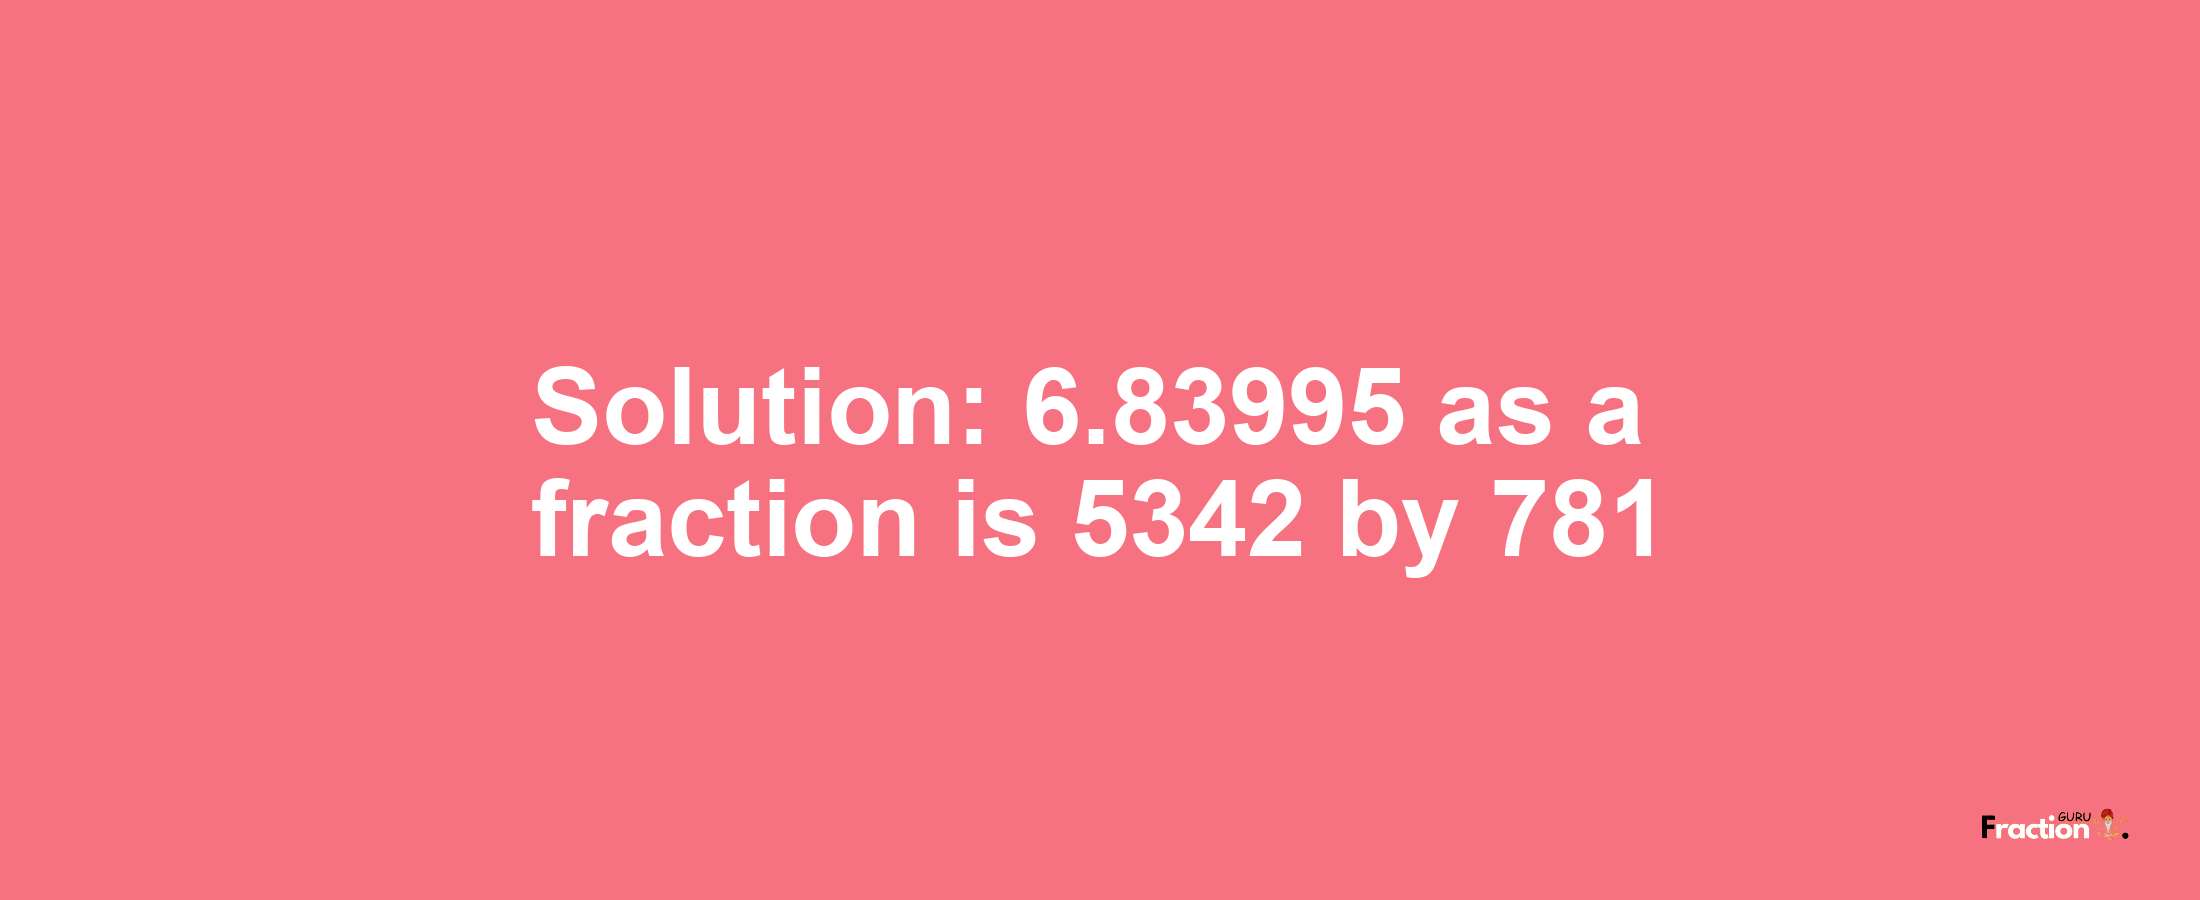 Solution:6.83995 as a fraction is 5342/781